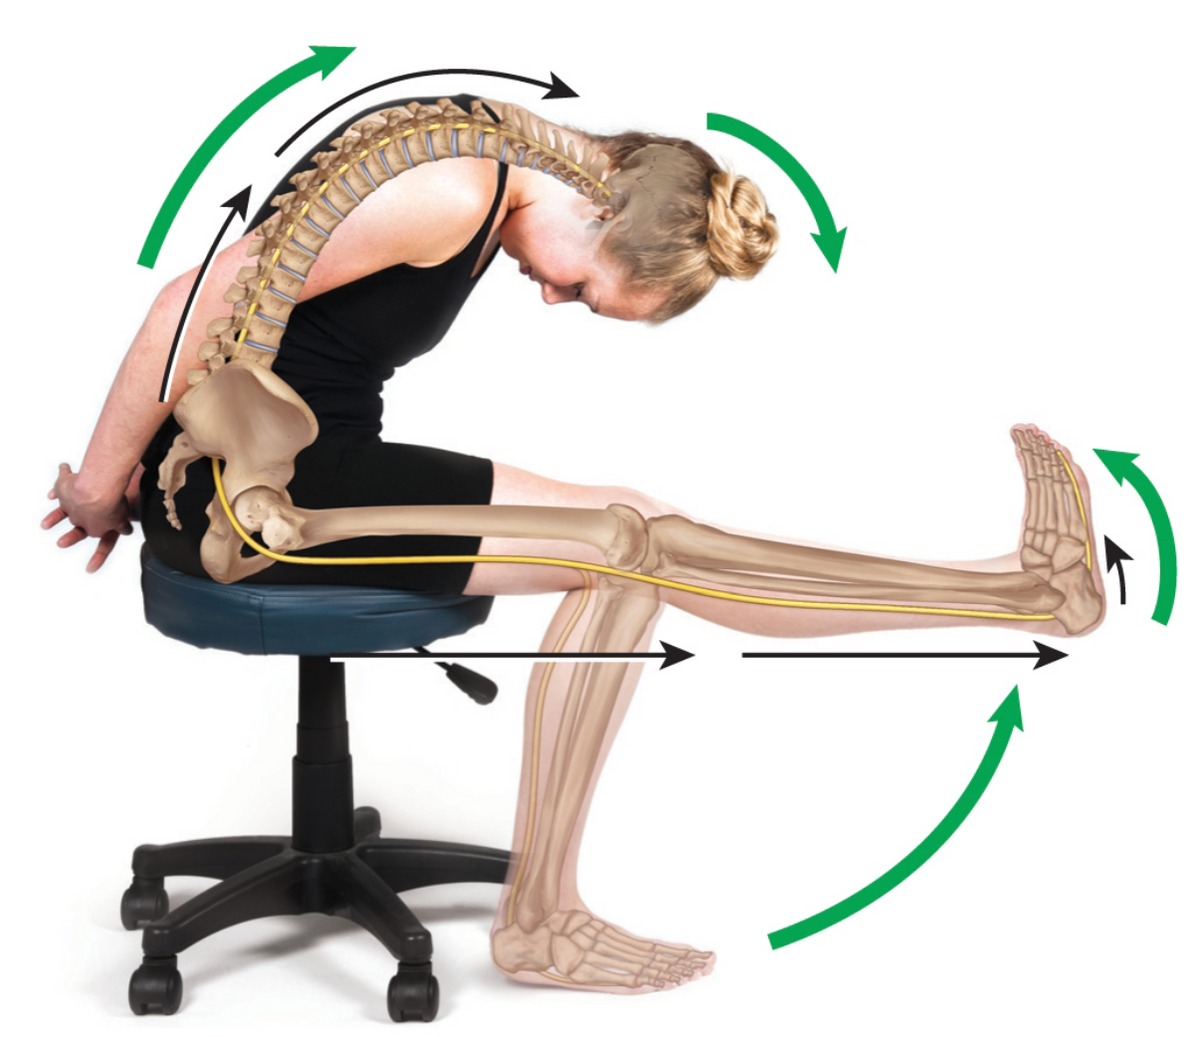 Increased neural tension in the sciatic nerve: Causes, tests, and exercises